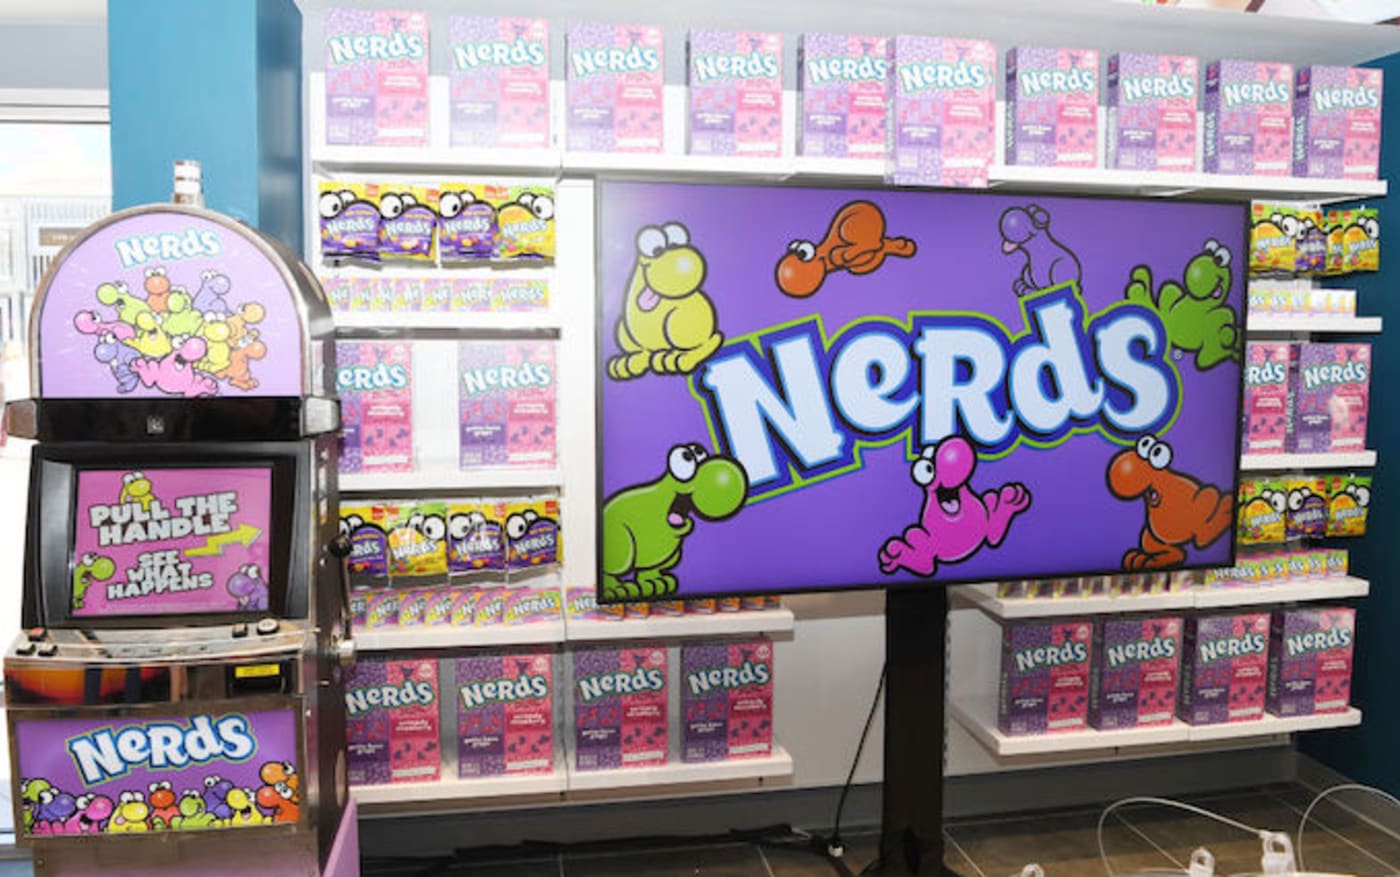 This is a picture of Nerds.